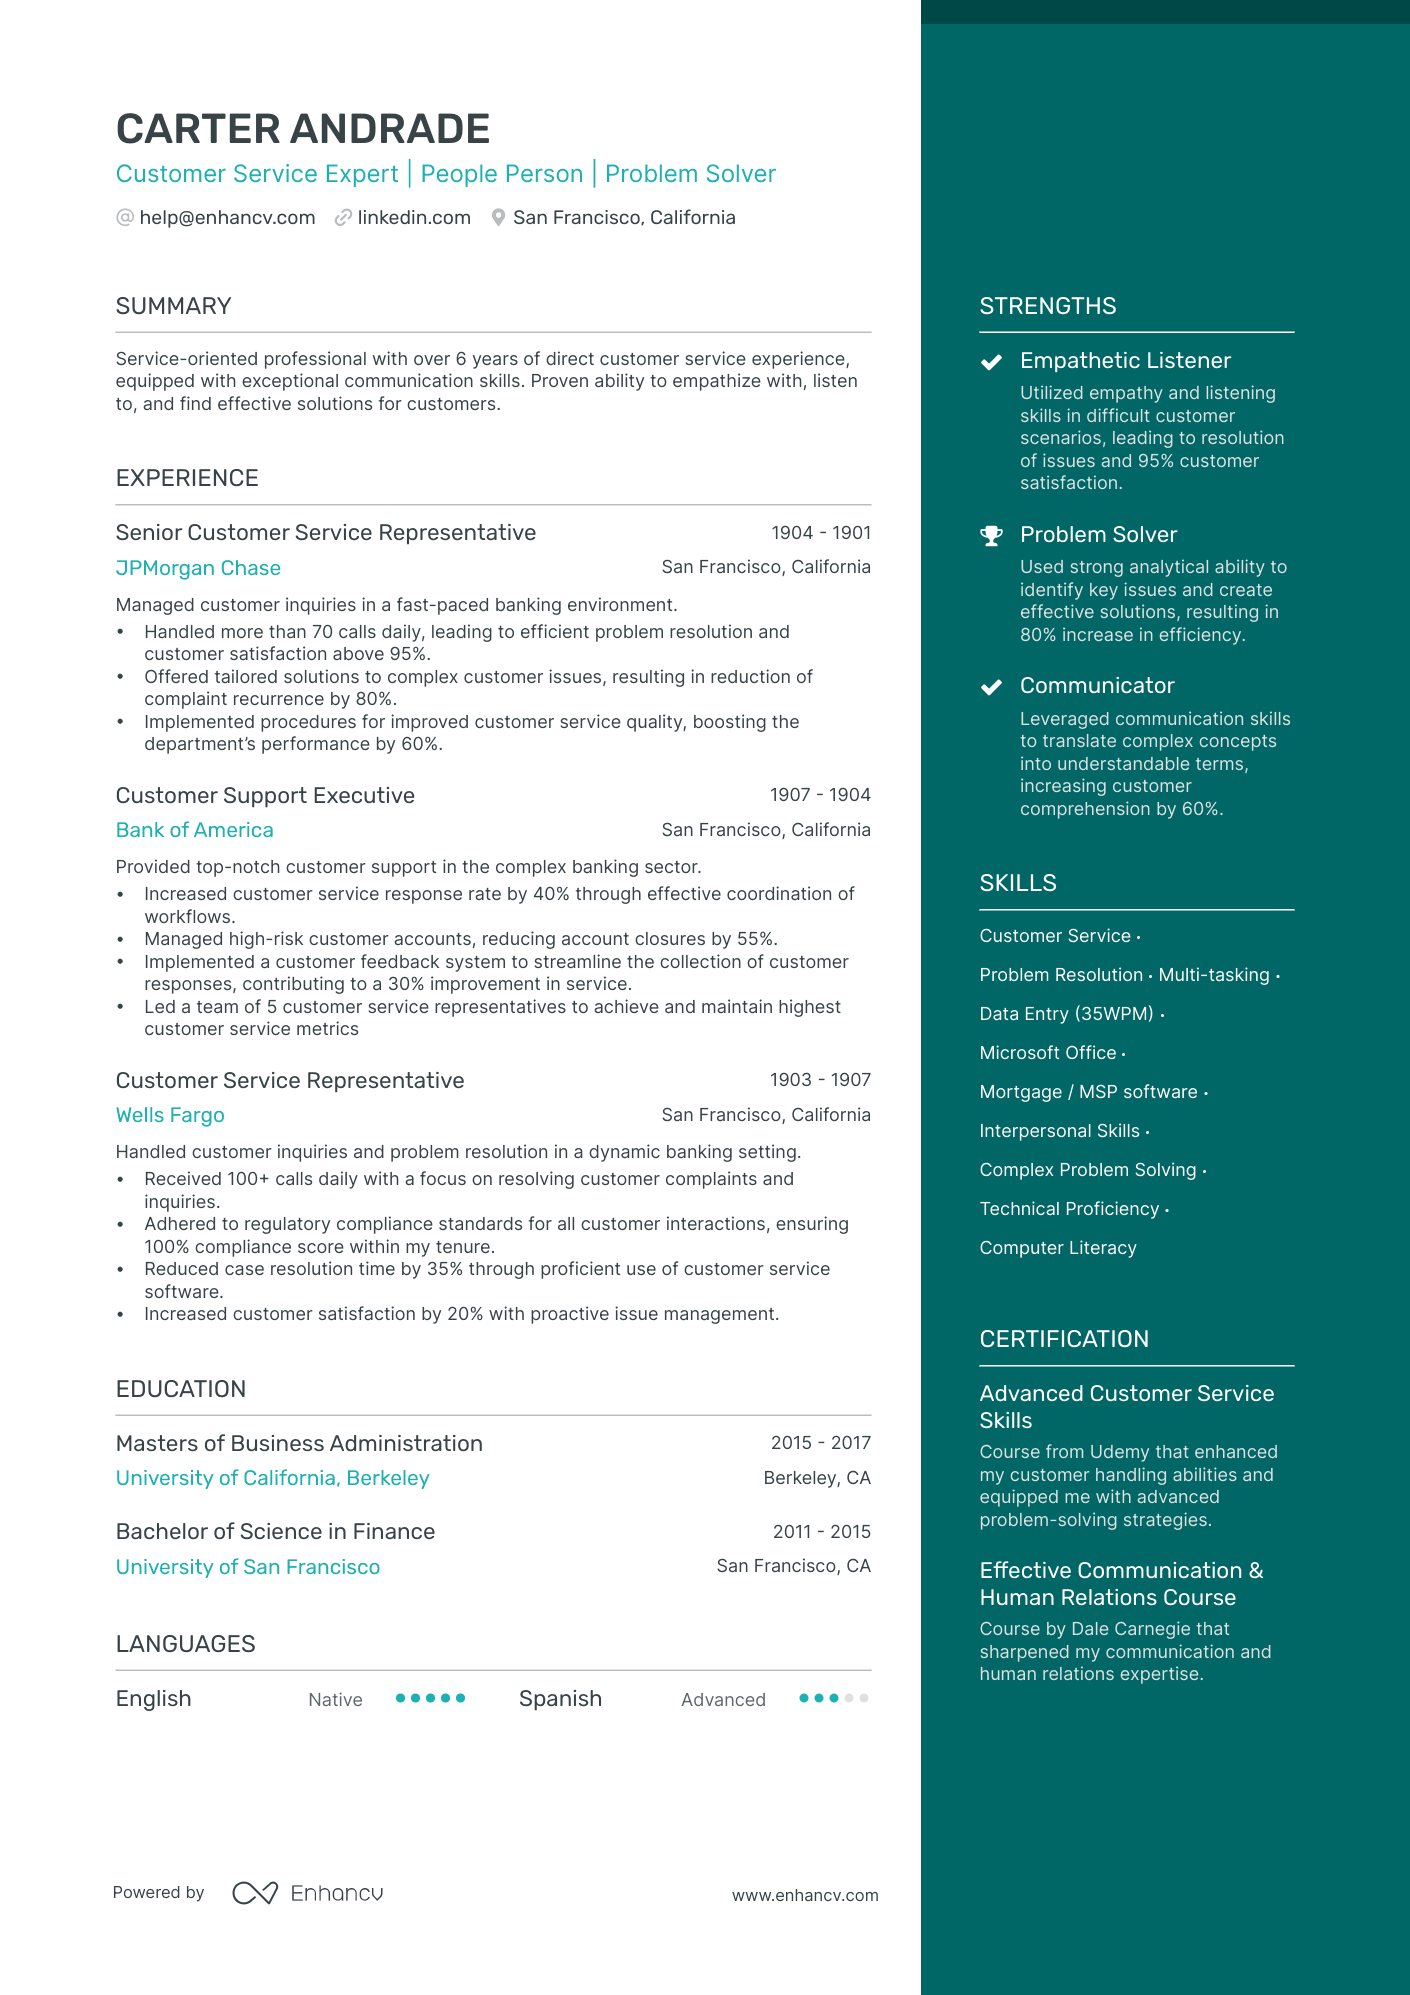 resume objective for customer service specialist